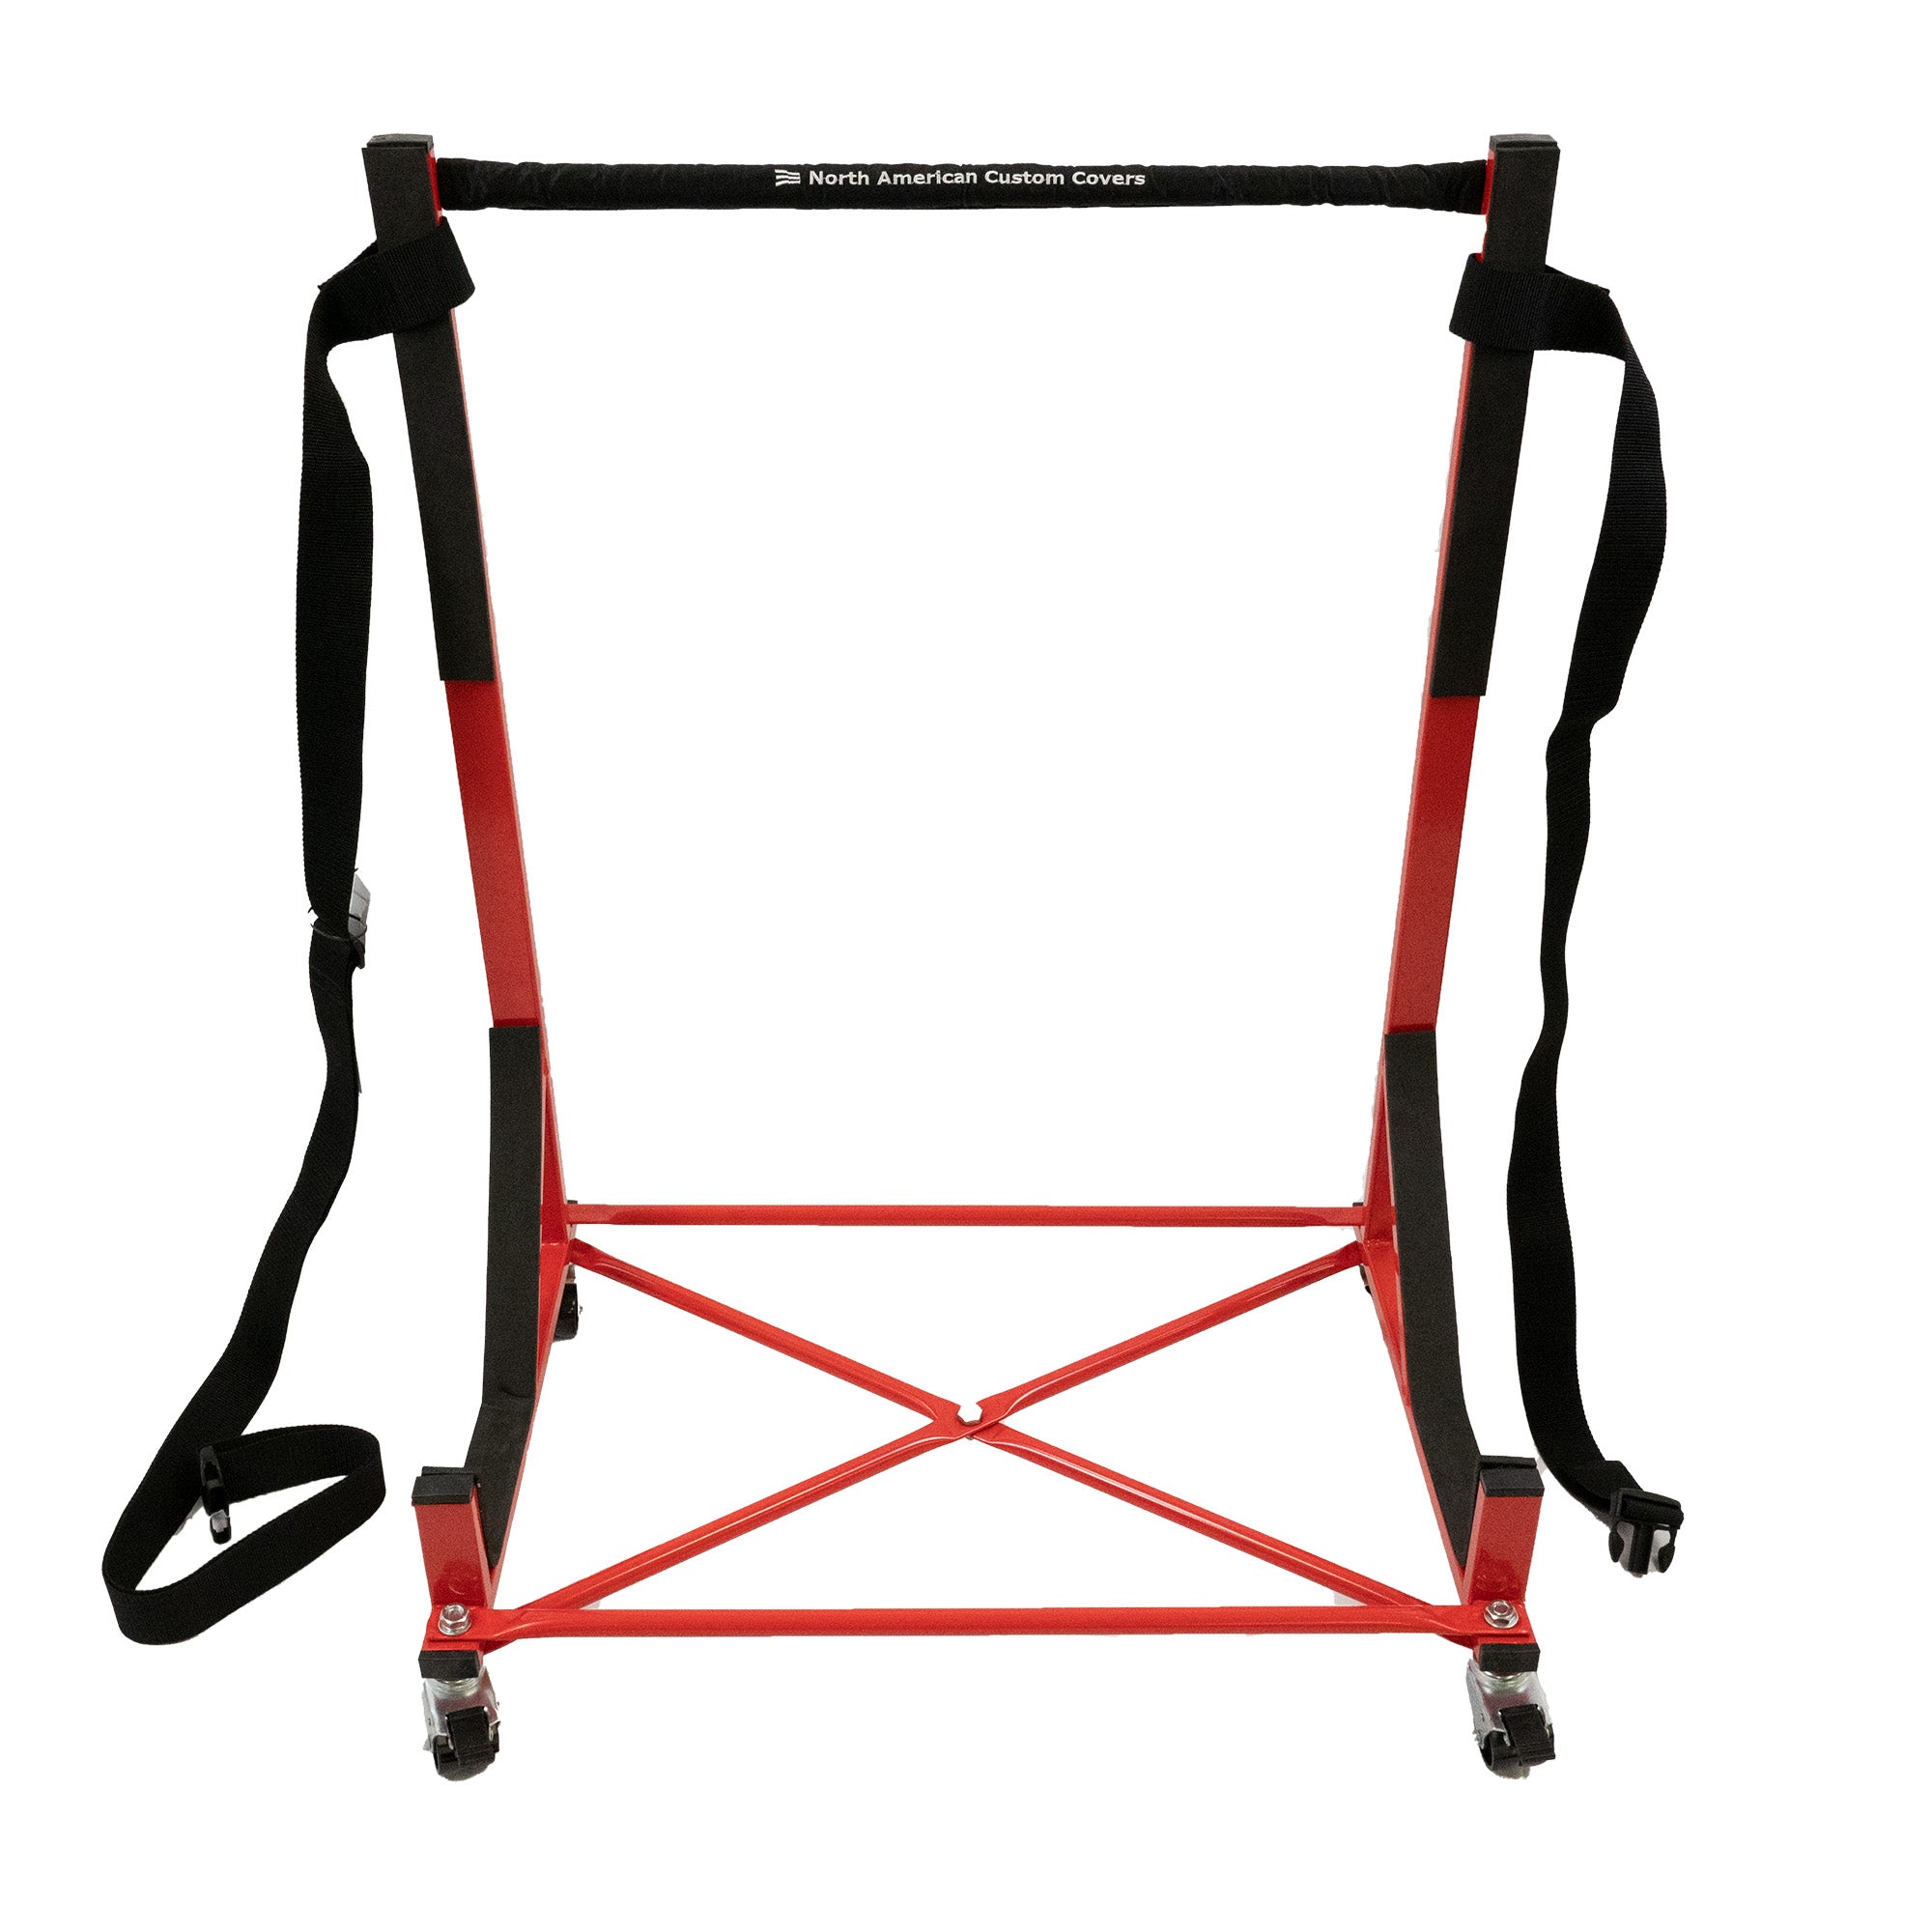 Honda S2000 Heavy-duty Hardtop Stand Trolley Cart Rack (Red) with Securing Harness and Hard Top Dust Cover (050R)